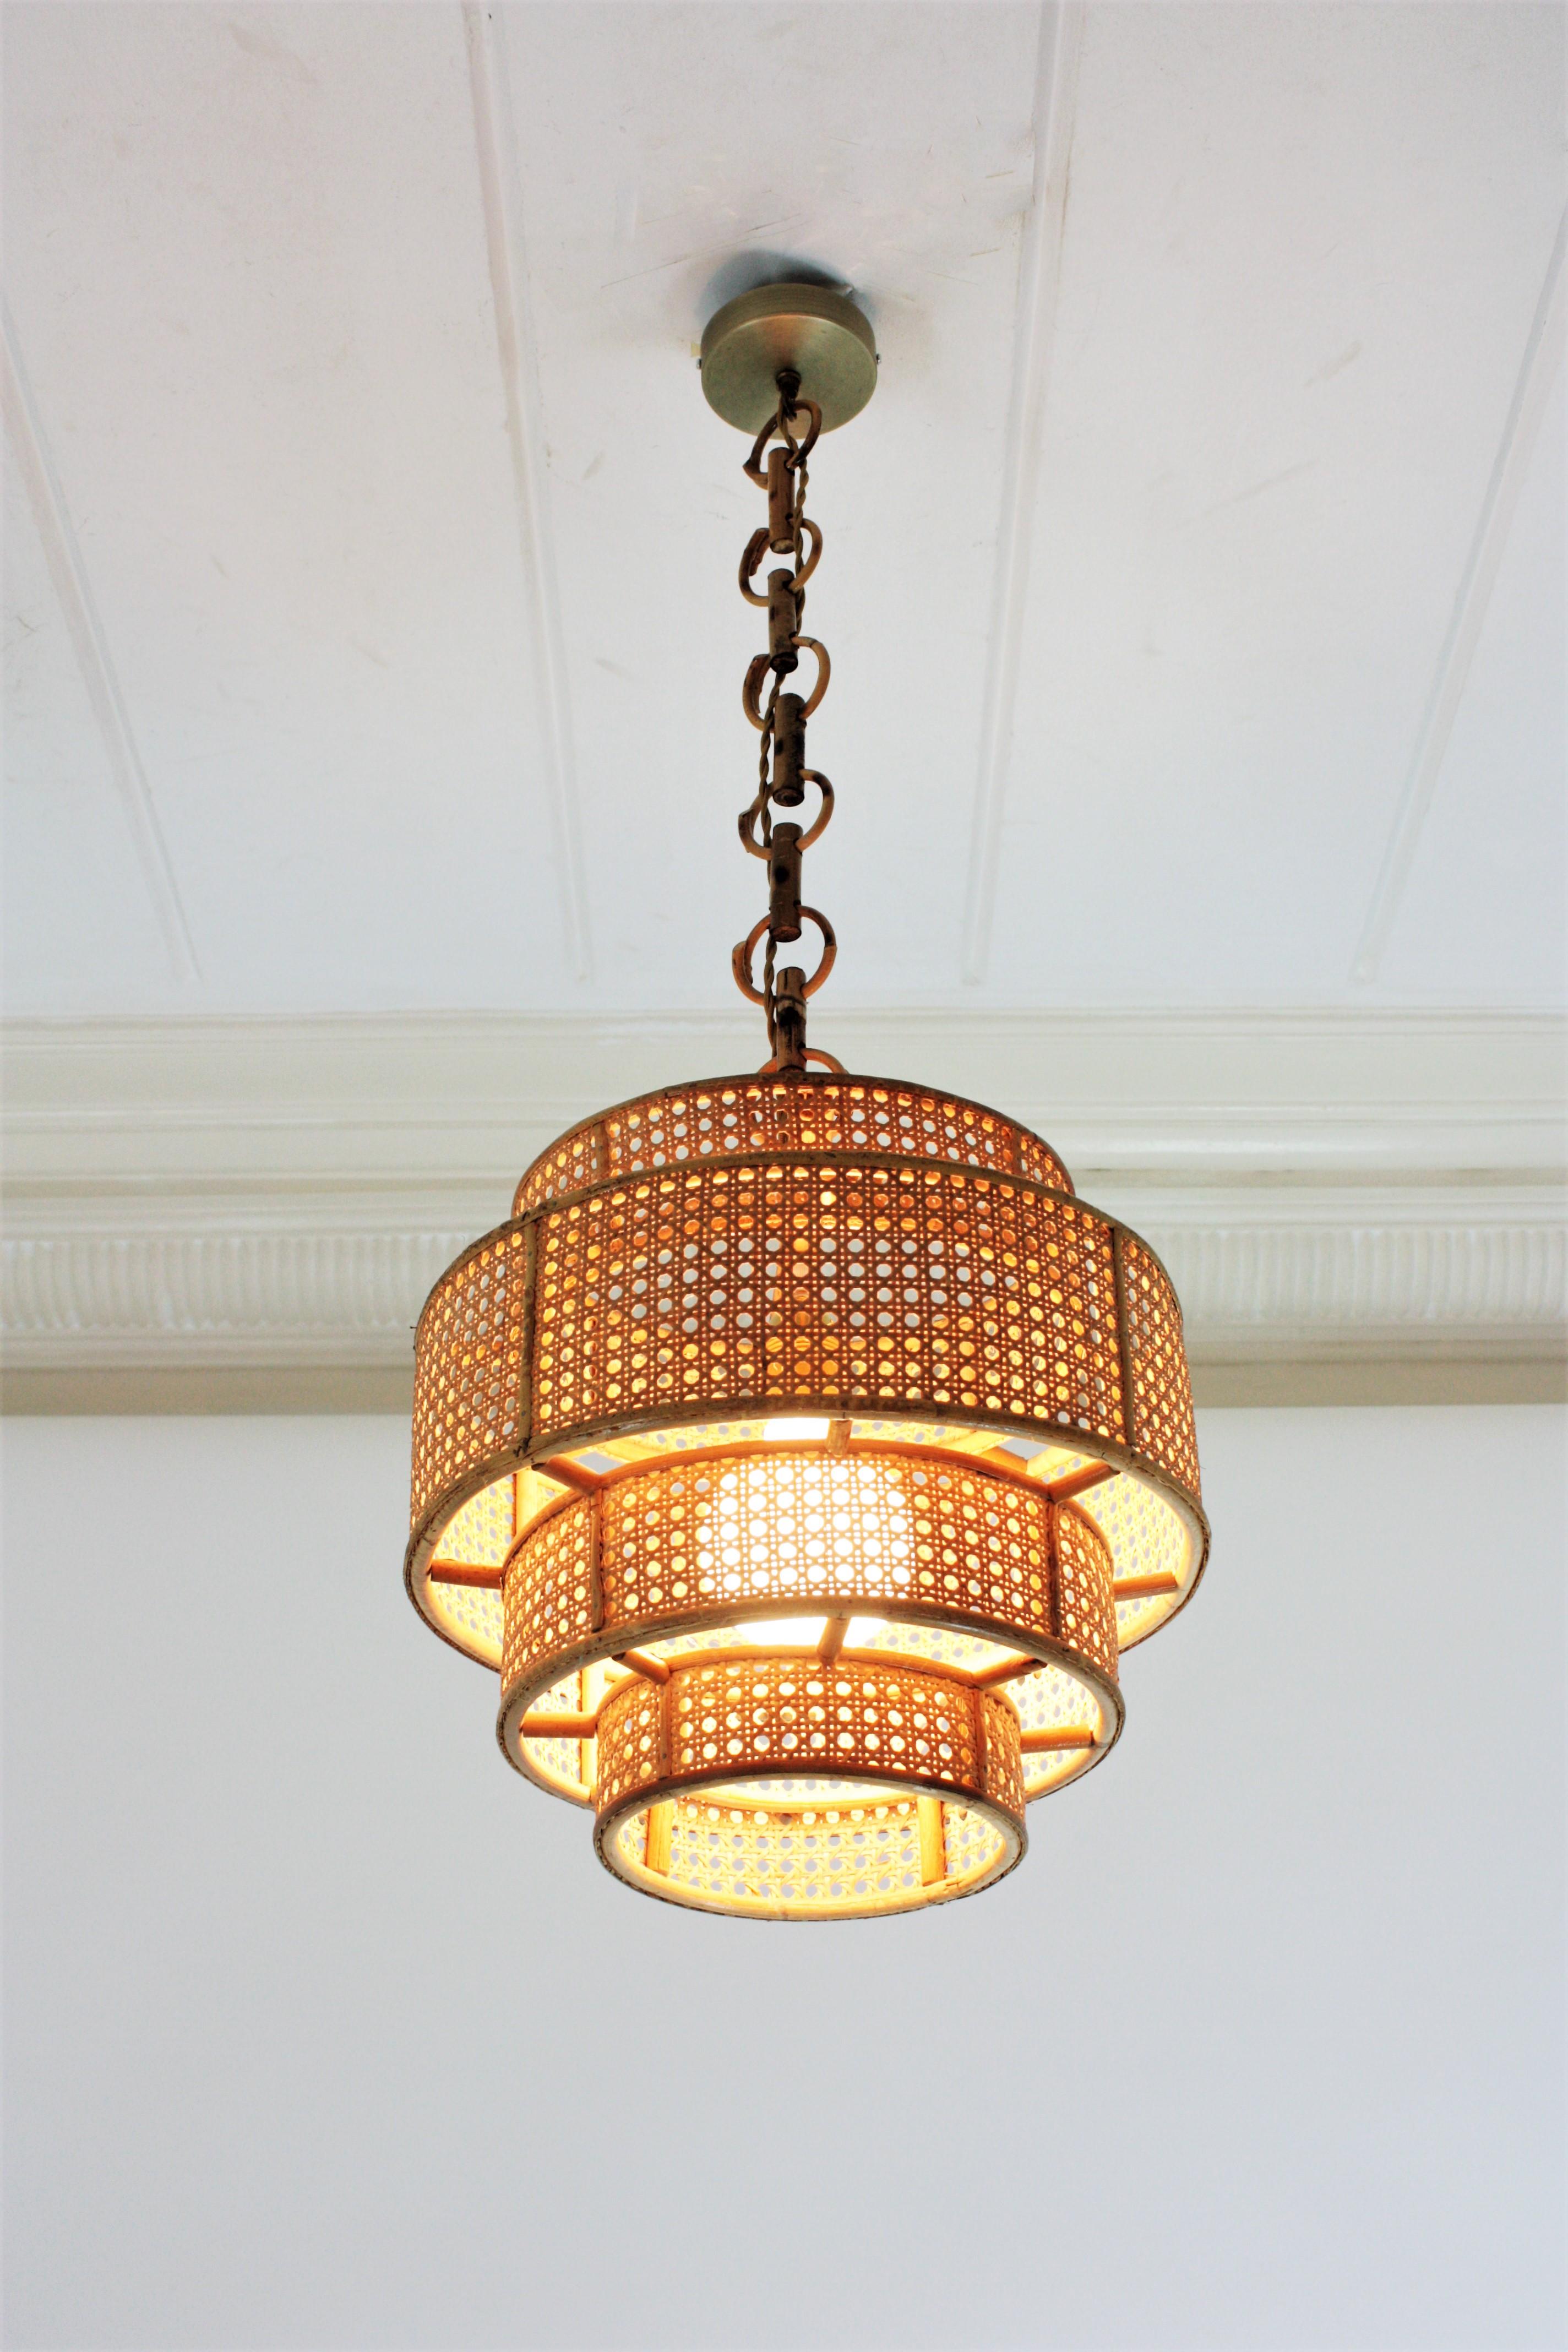  Rattan Wicker Weave Concentric Cylinder Pendant Hanging Light, 1960s For Sale 13